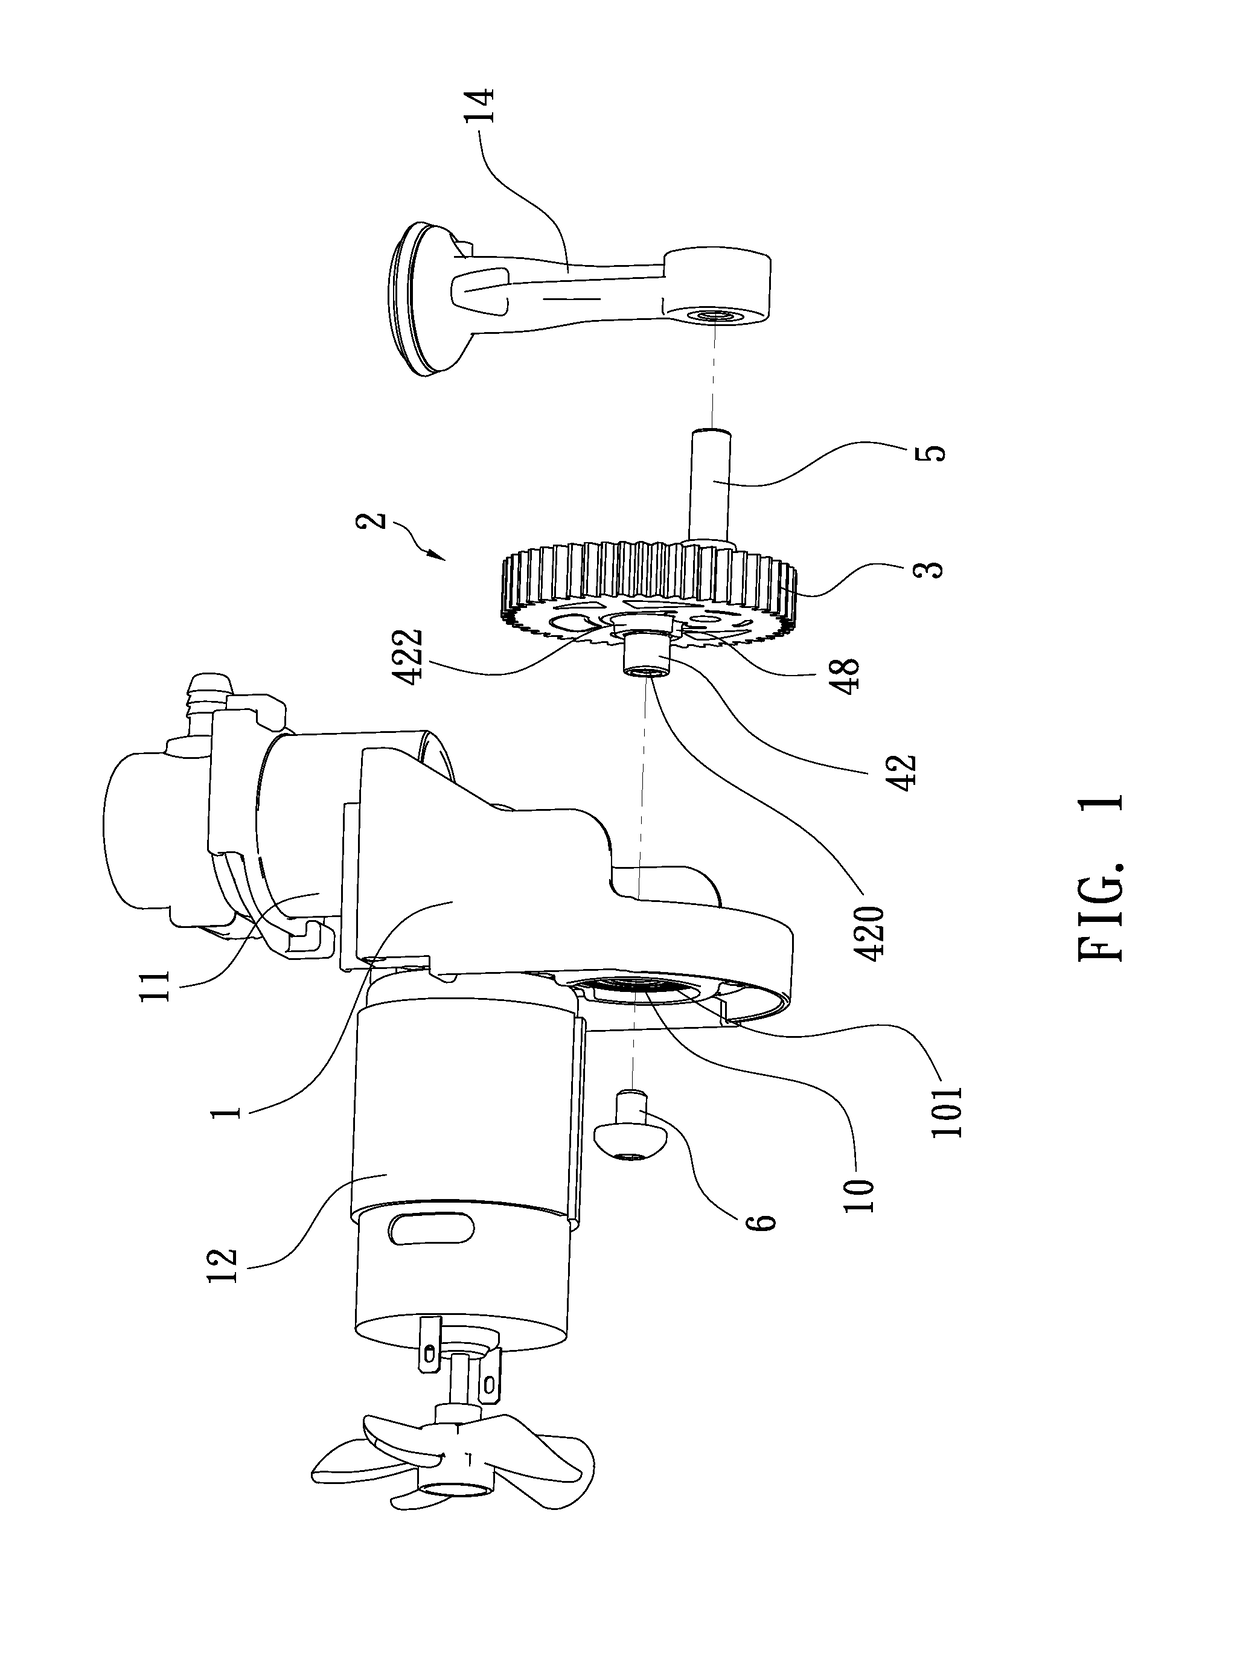 Air compressor with improved rotating device